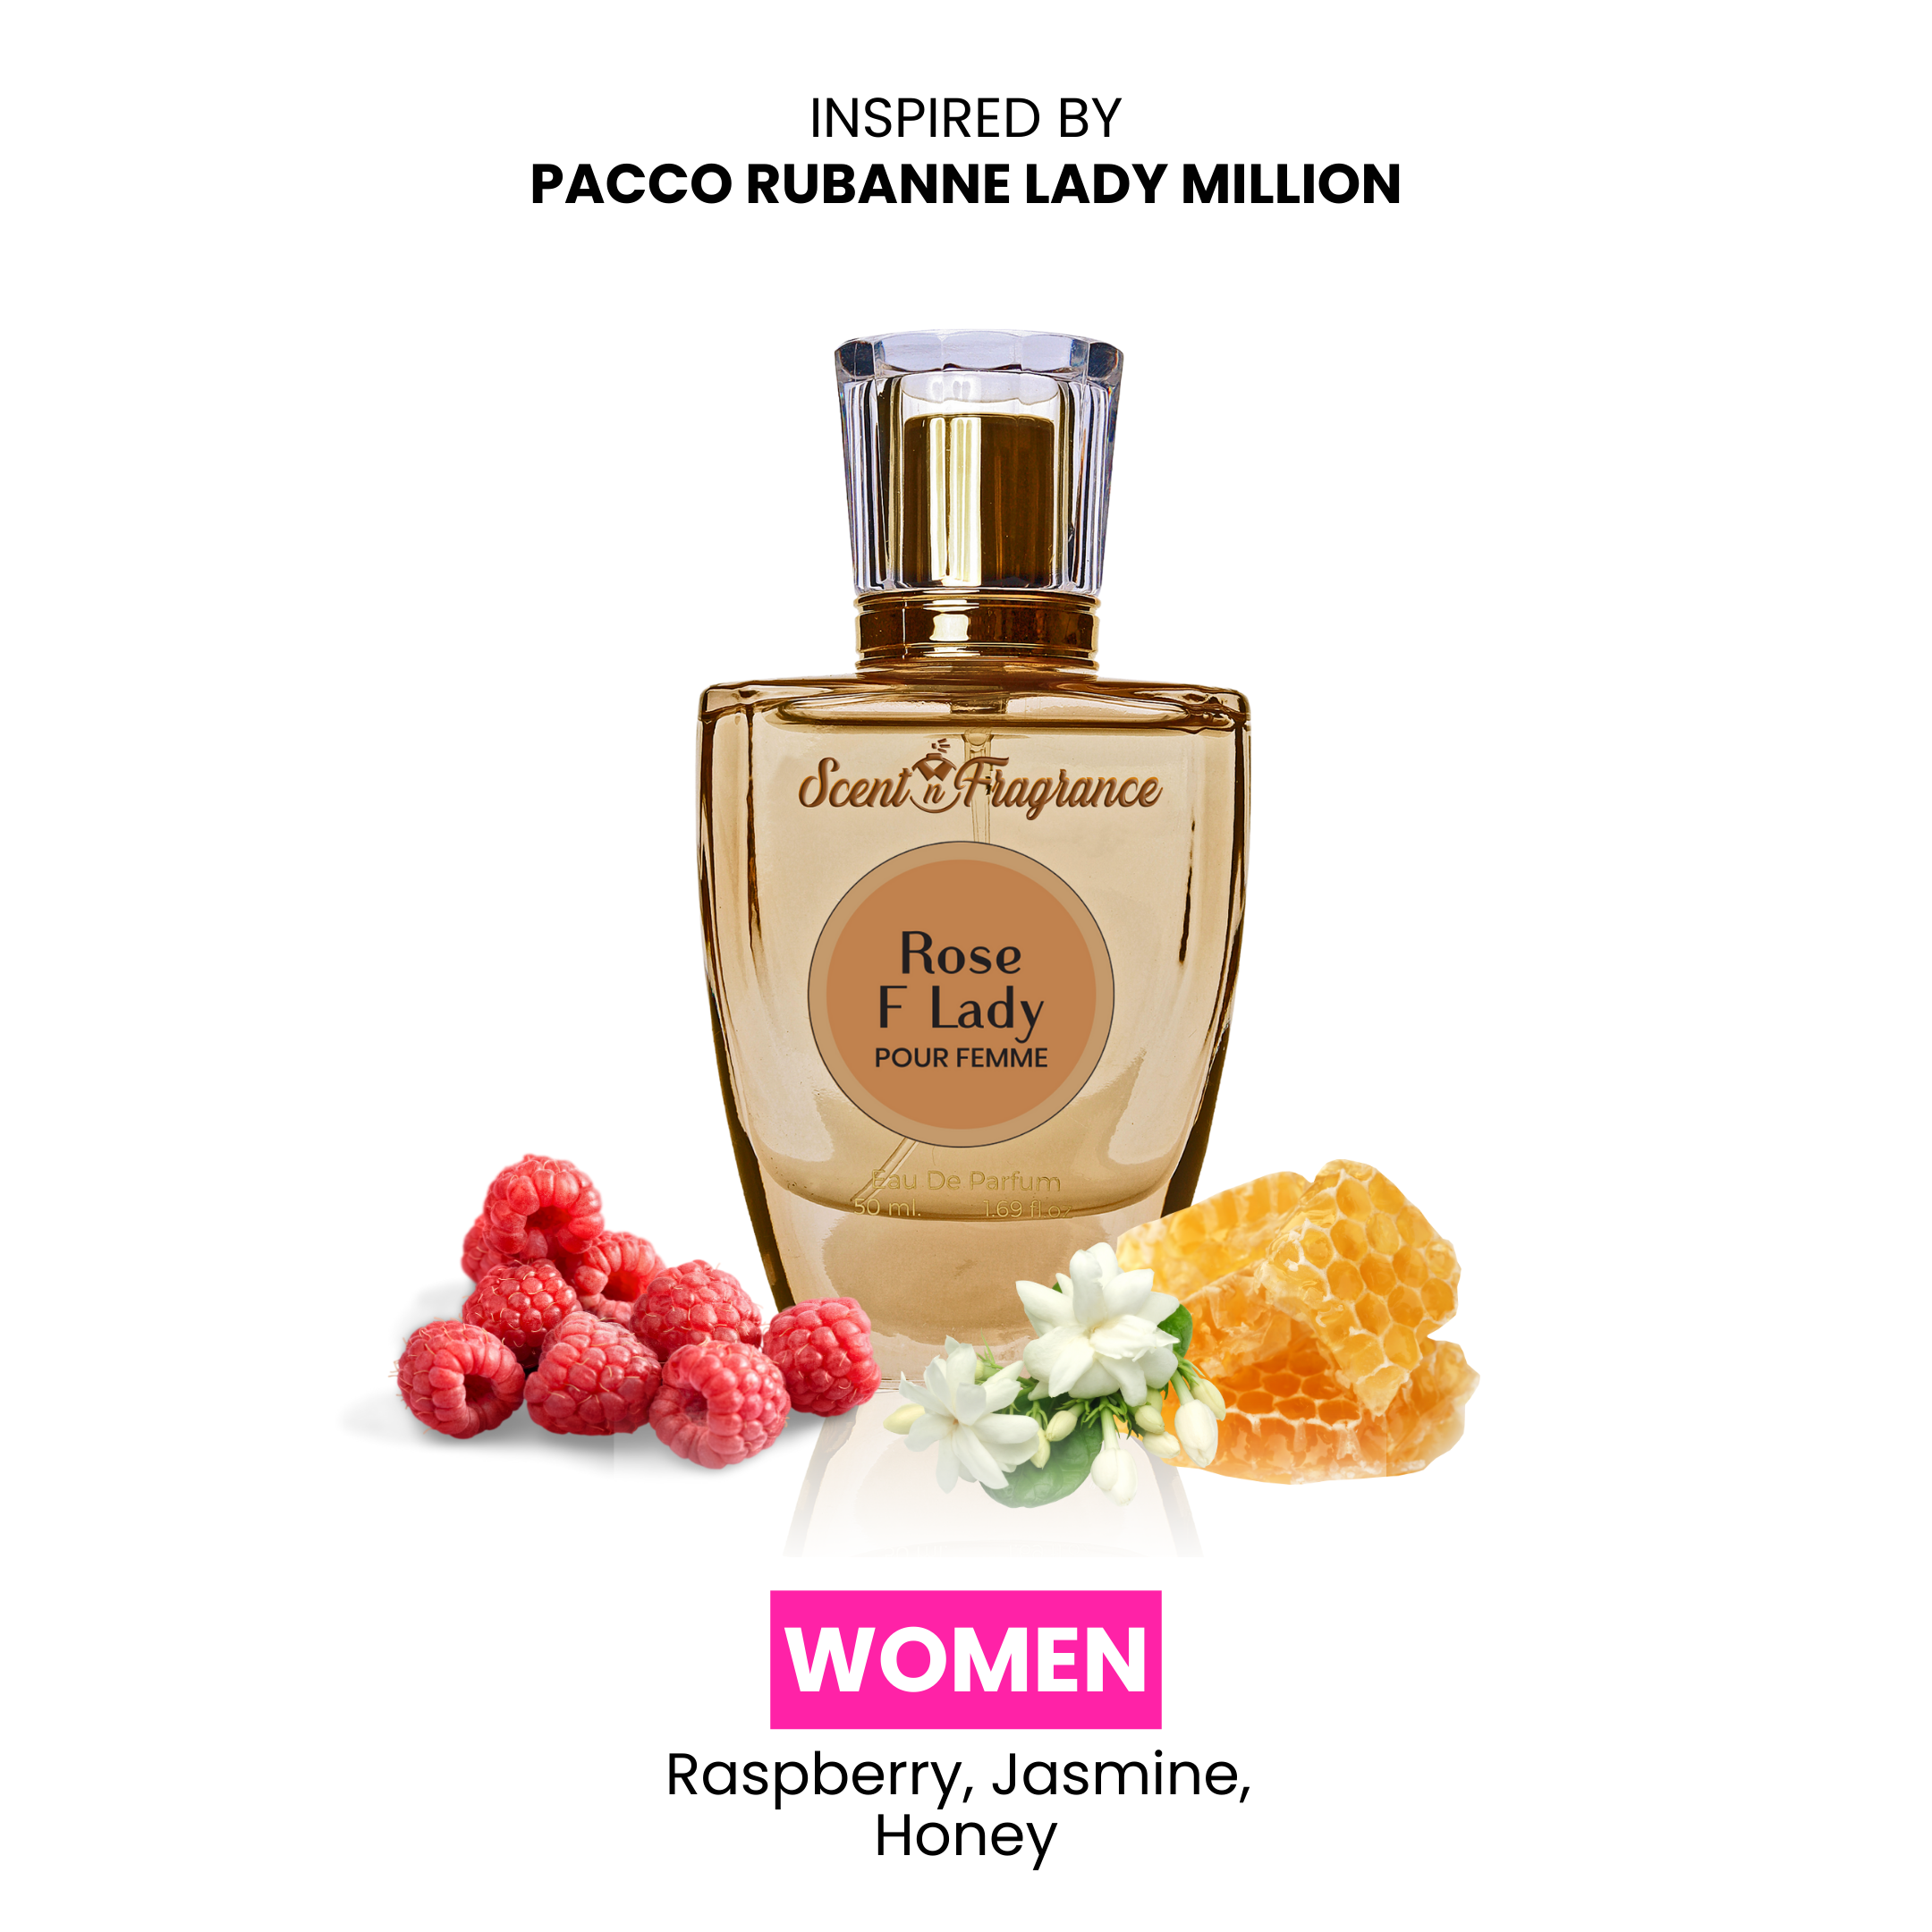 ROSE F LADY - INSPIRED BY PACCO RUBANNE LADY MILLION by Scent N Fragrance